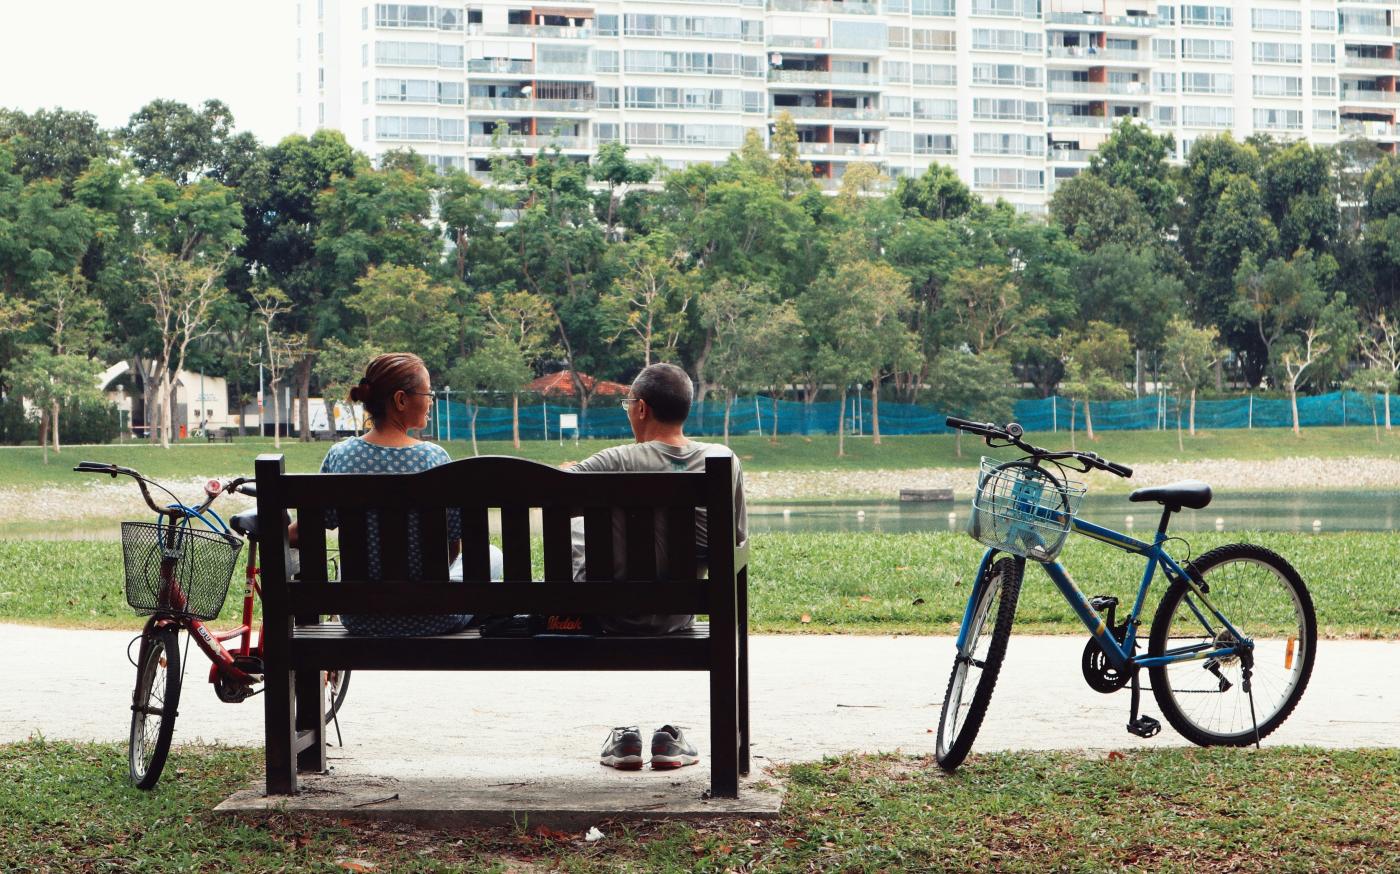 man and woman sitting on bench near two bikes viewing green field during daytime by Nguyen Thu Hoai courtesy of Unsplash.